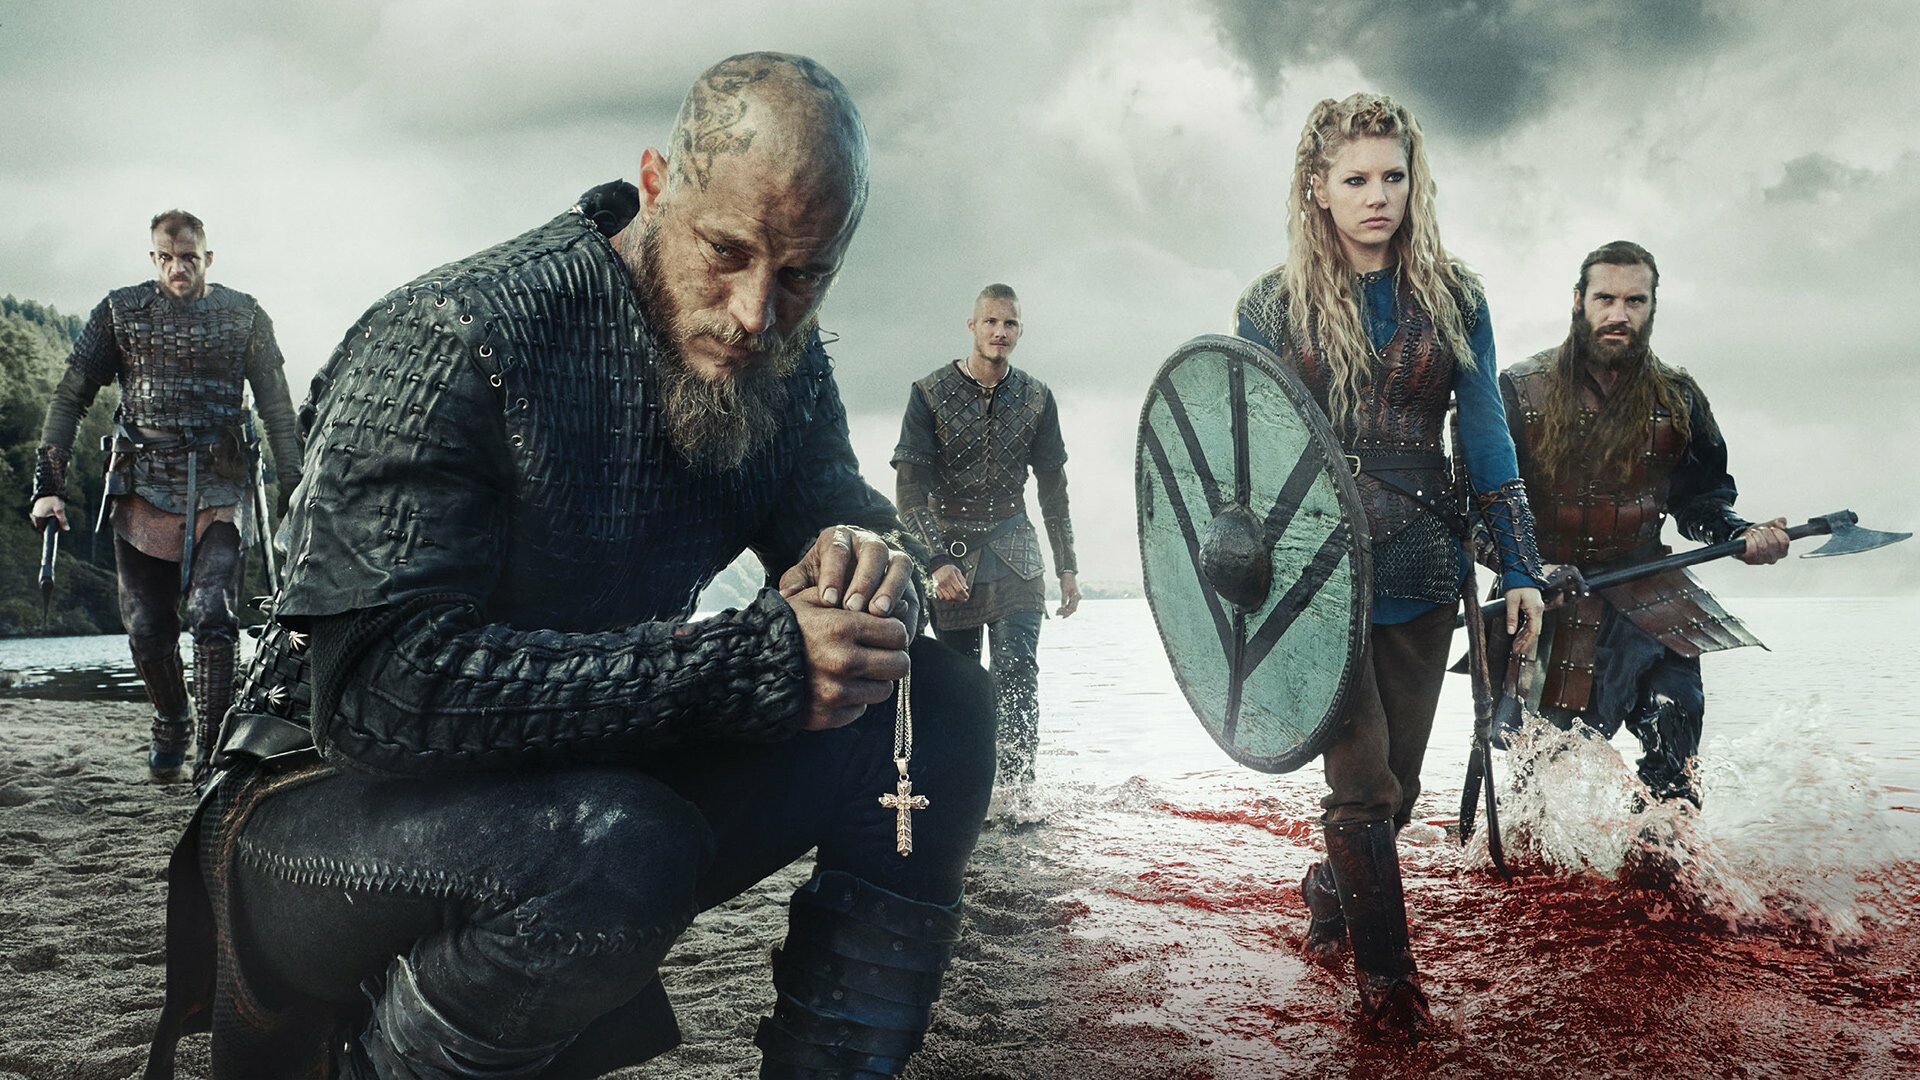 43+ Vikings Wallpapers: HD, 4K, 5K for PC and Mobile | Download free images  for iPhone, Android